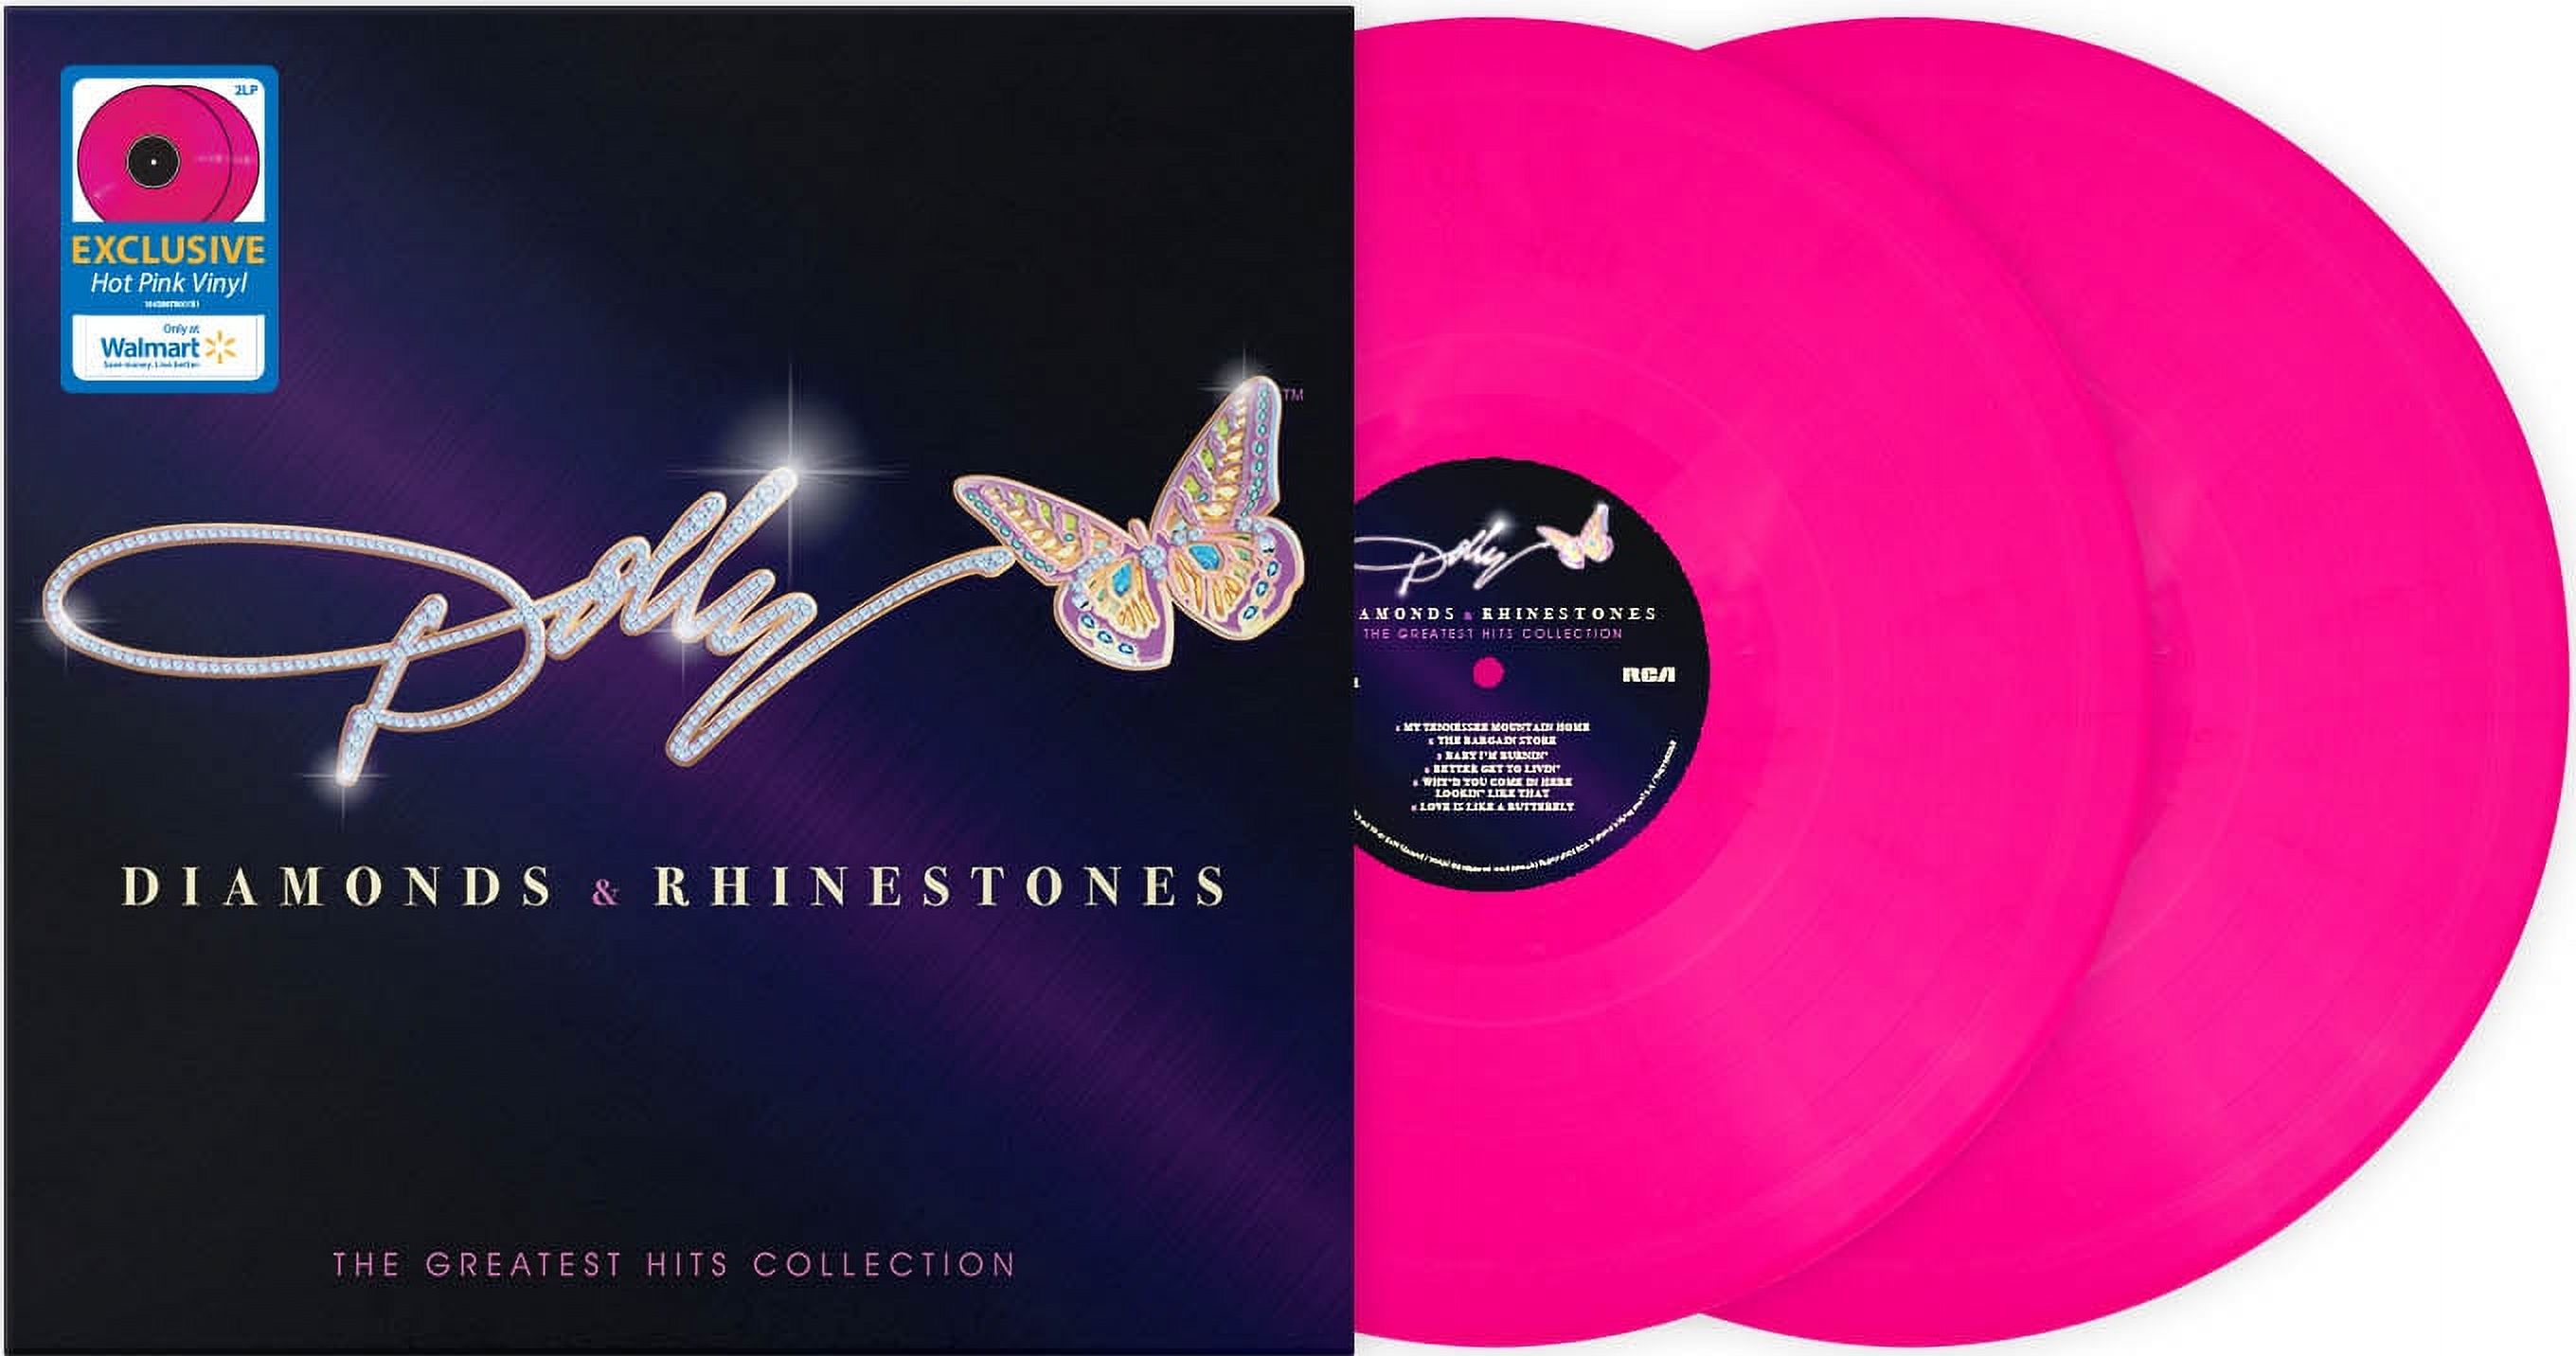 Dolly Parton - Diamonds & Rhinestones: The Greatest Hits Collection - Country - Vinyl [Exclusive] - image 2 of 4